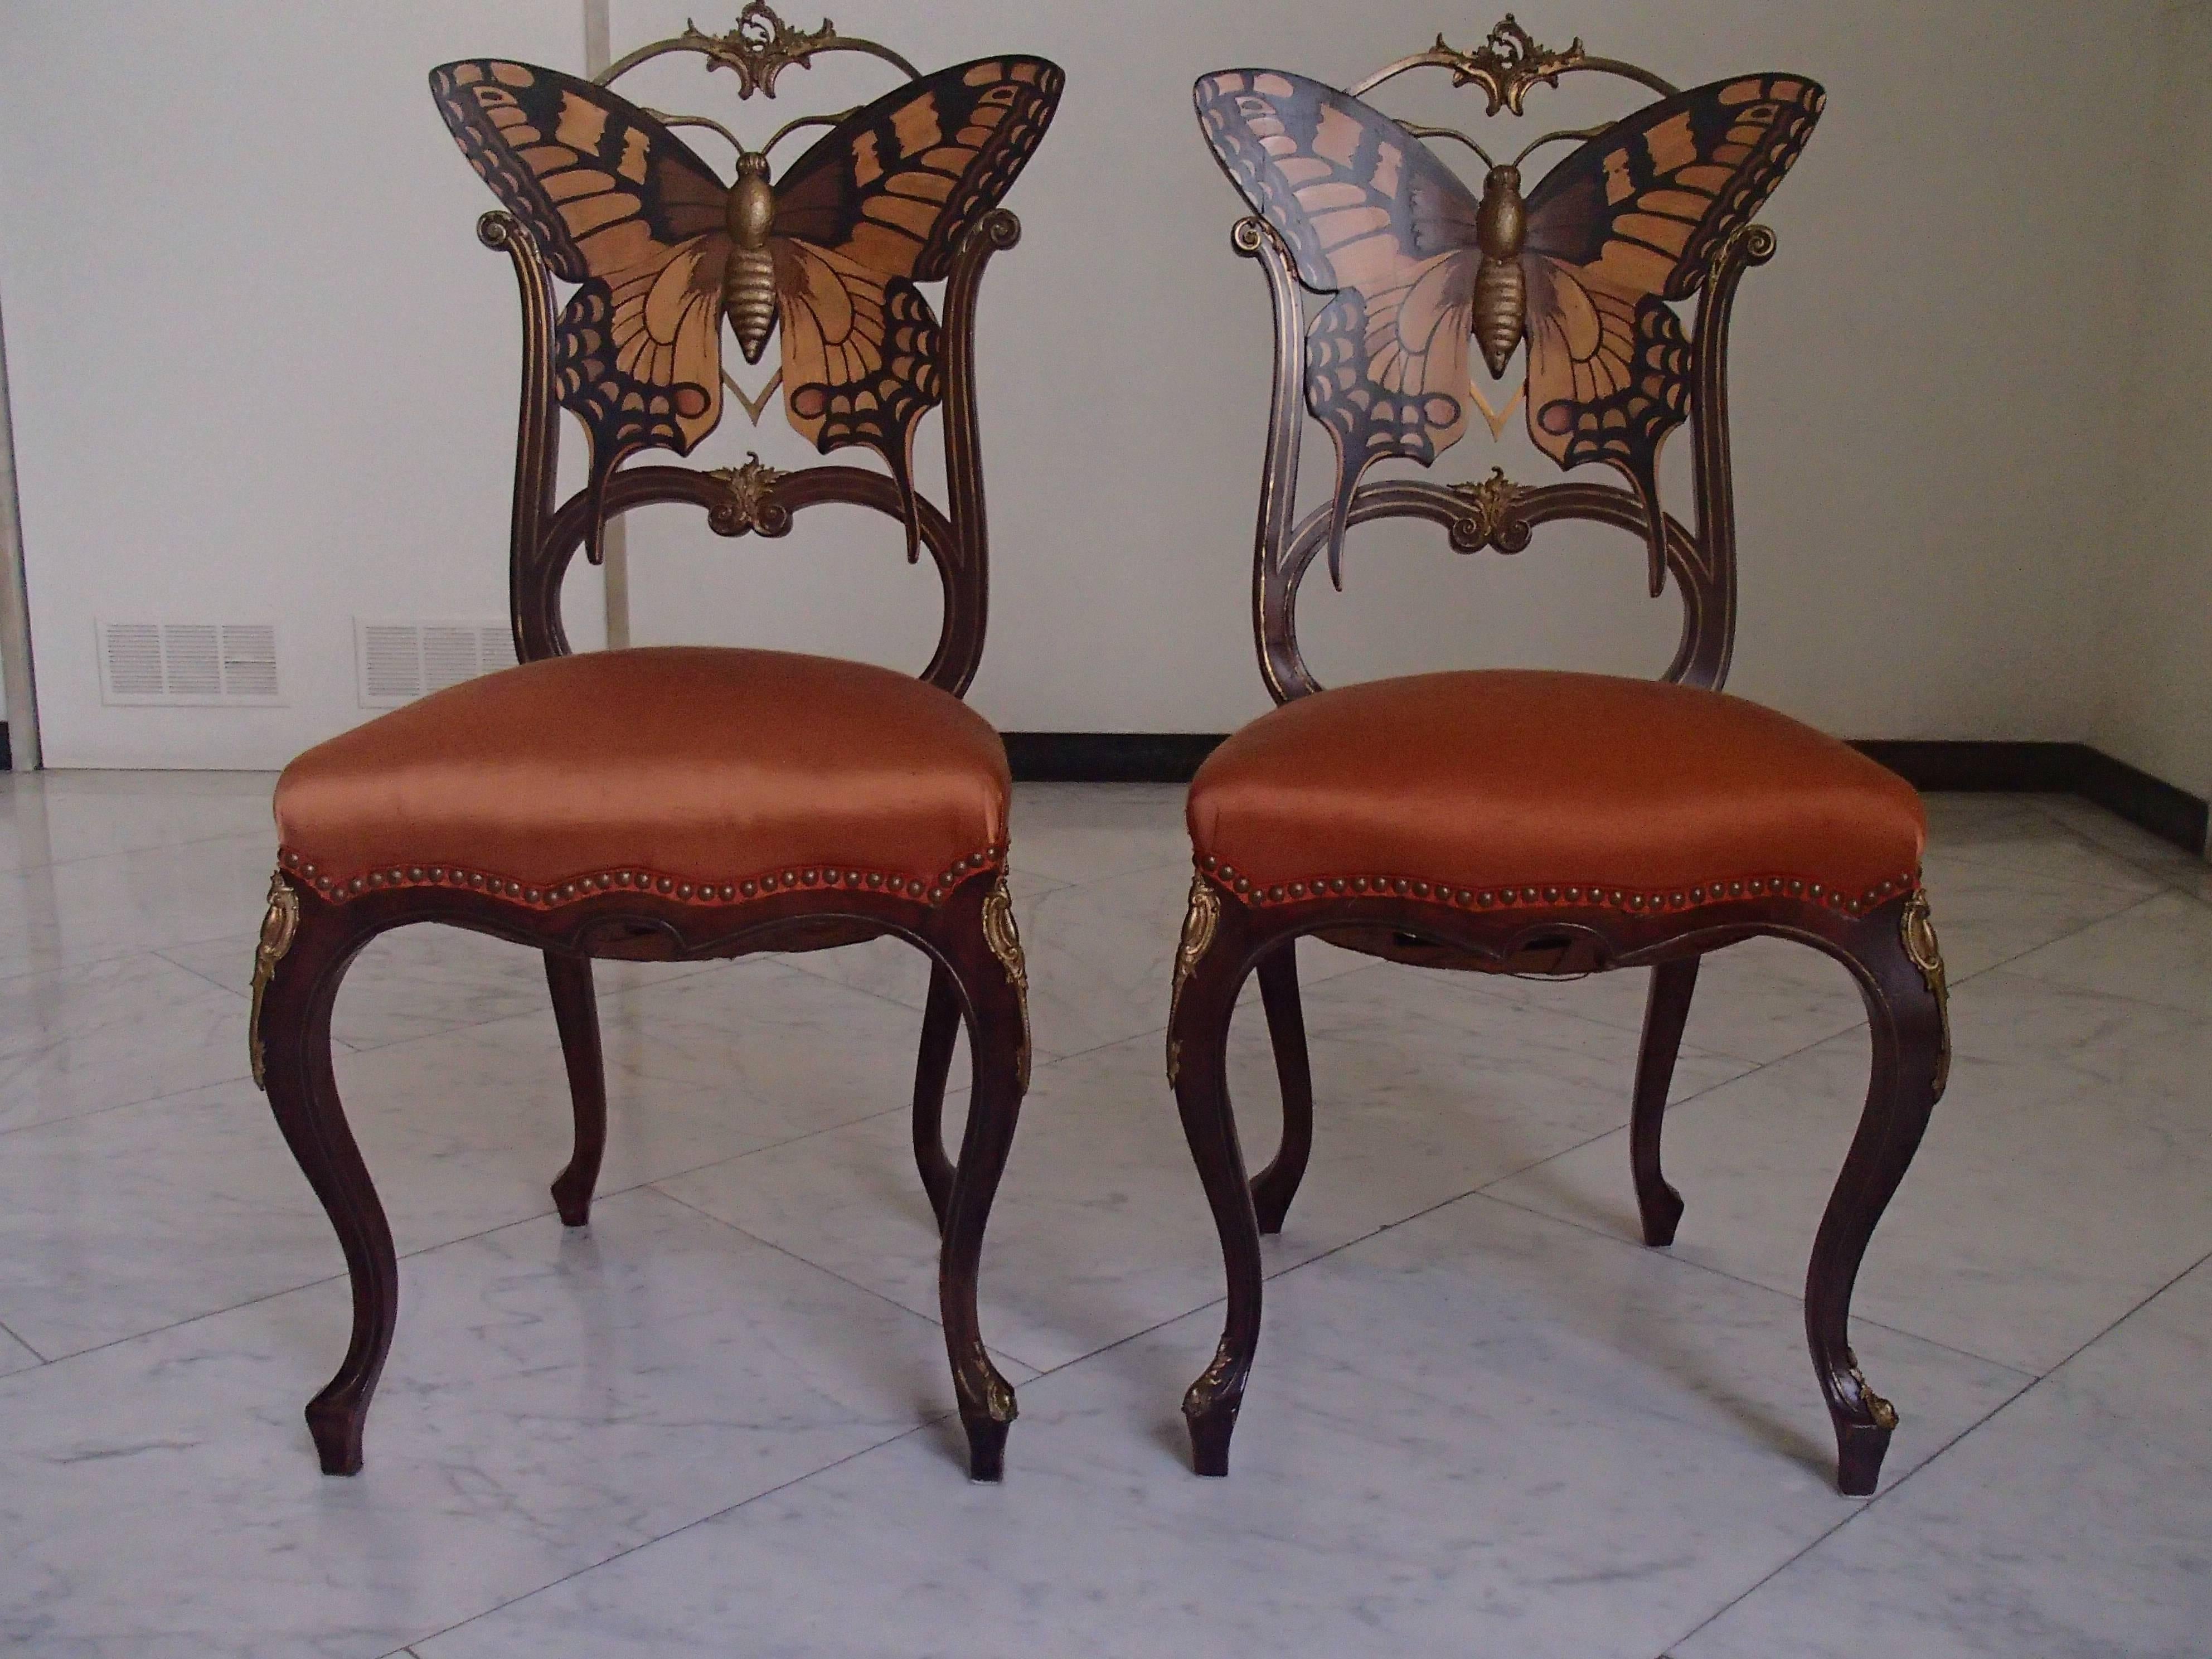 Early Art Nouveau pair of butterfly inlaid chairs with brass ornaments.